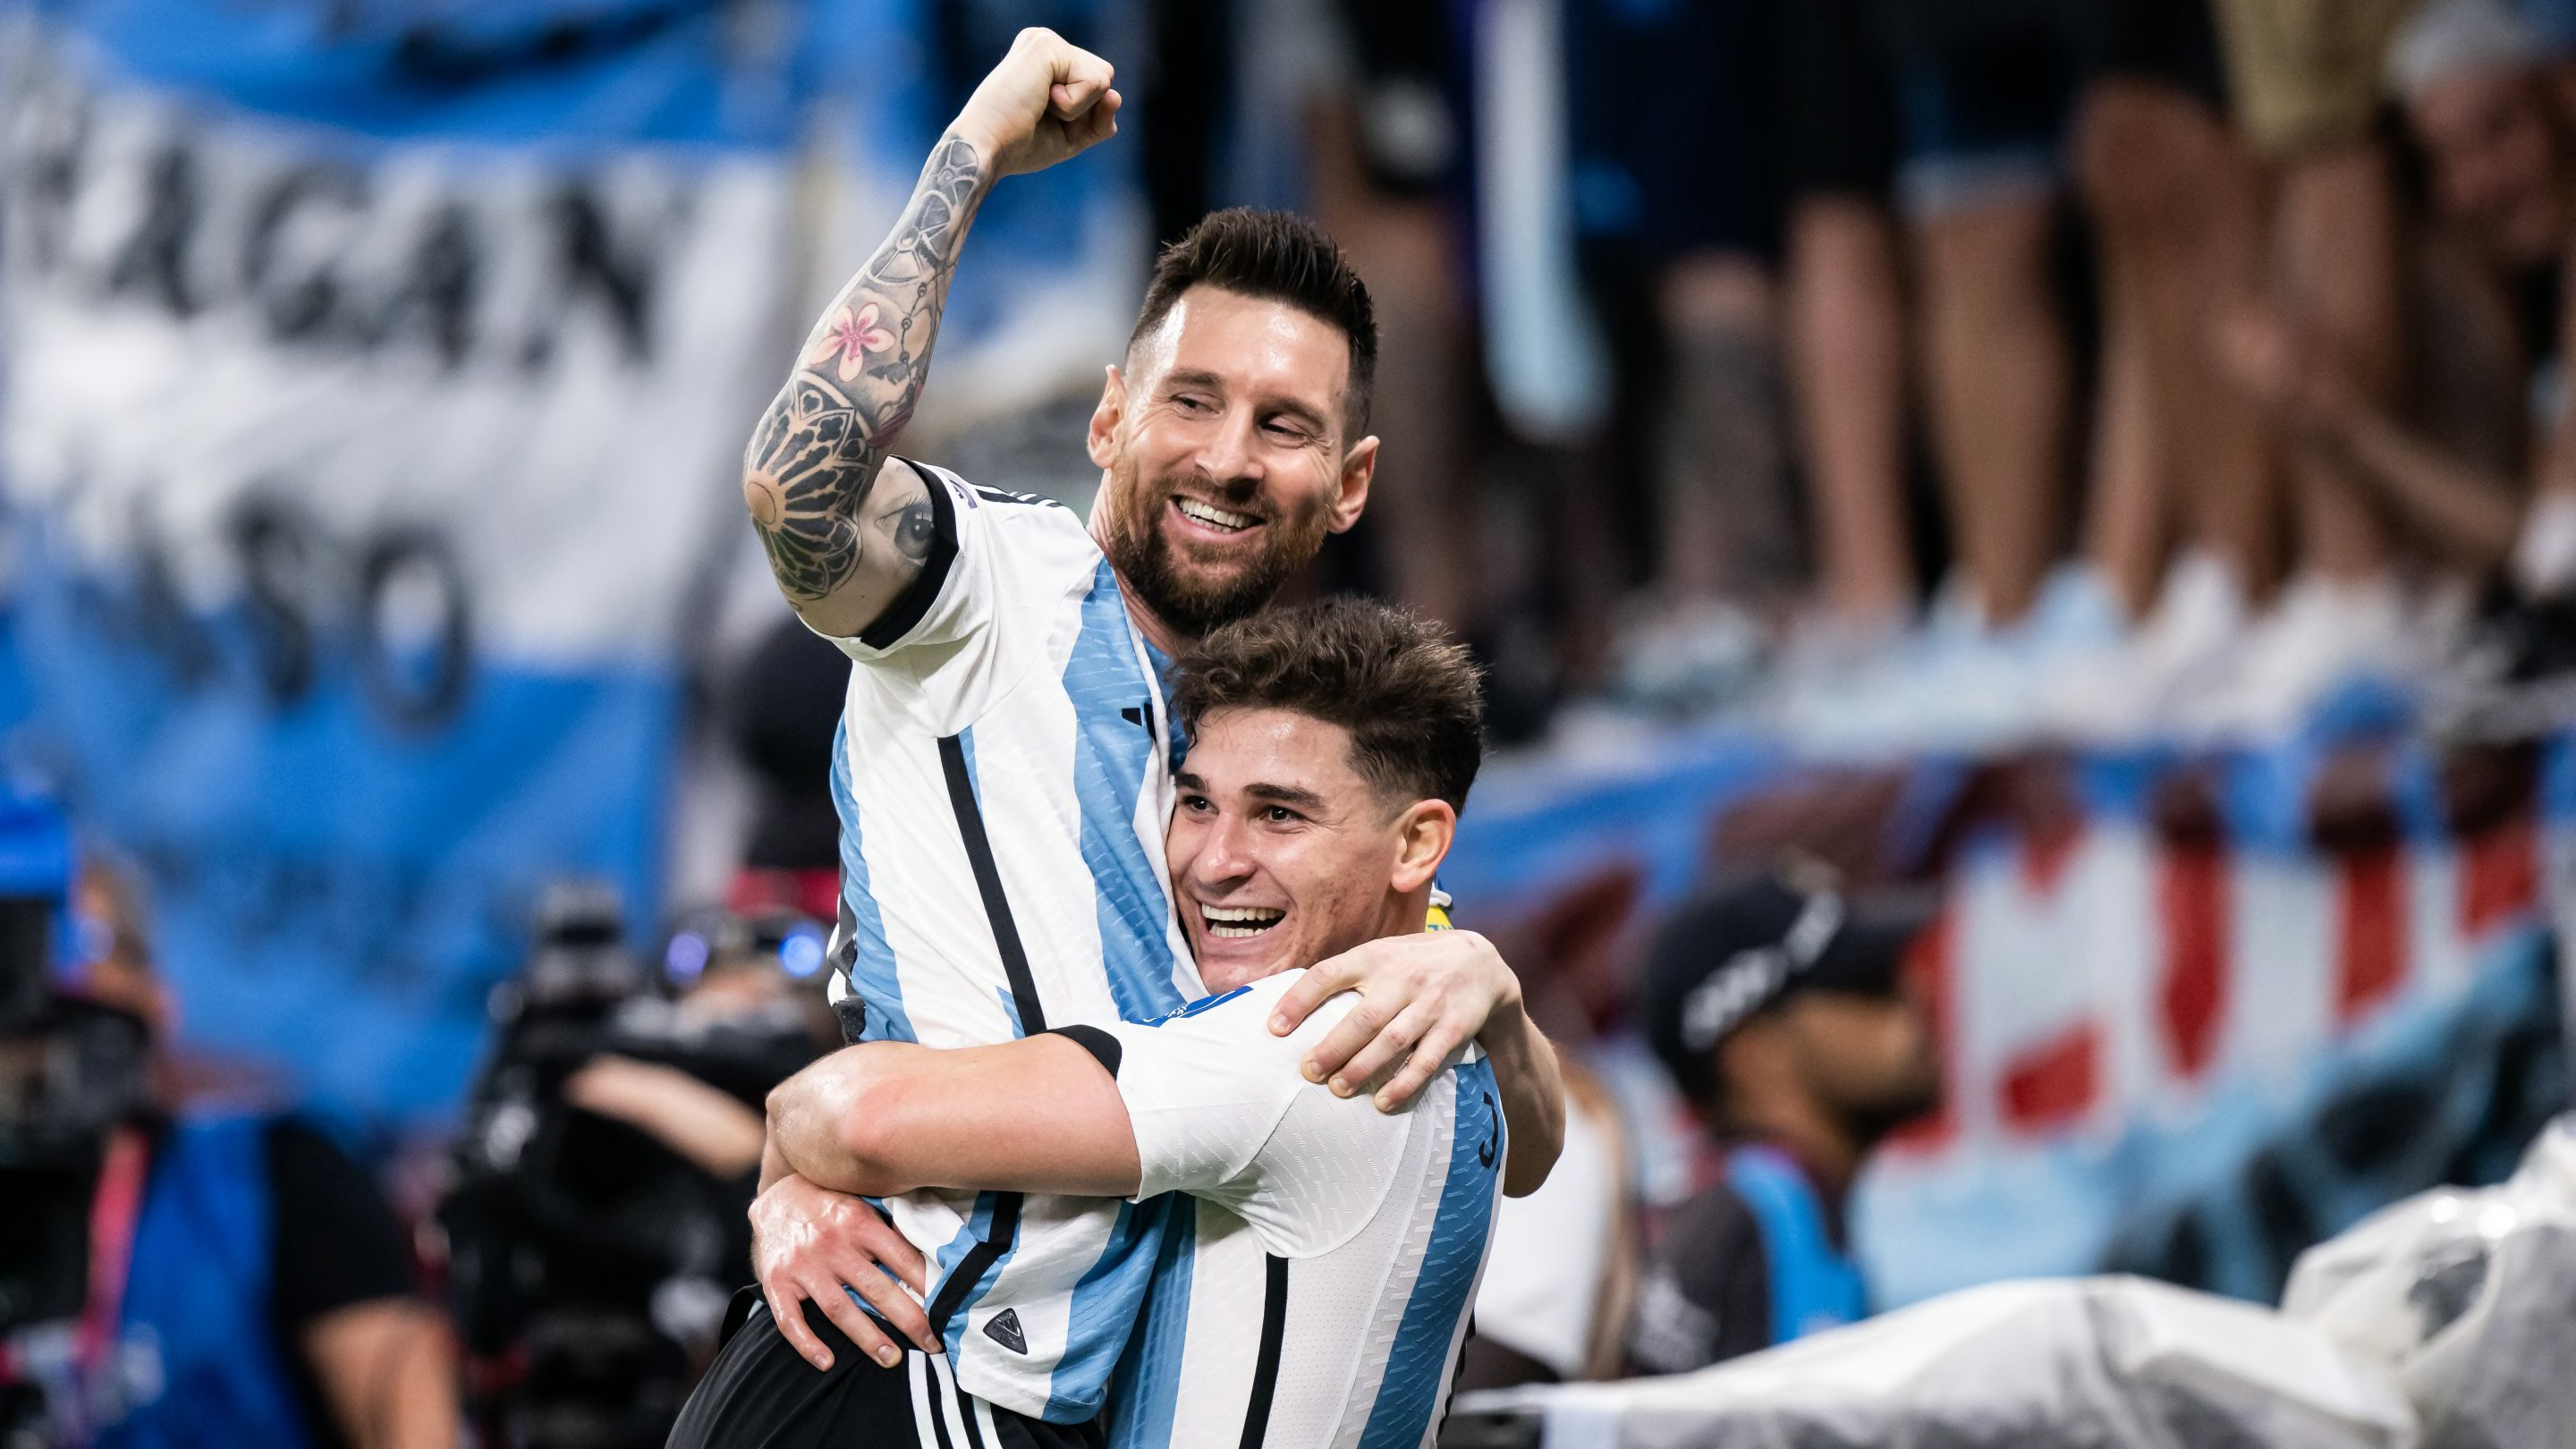 Lionel Messi steps up in big moment for Argentina to mark 1,000th career game